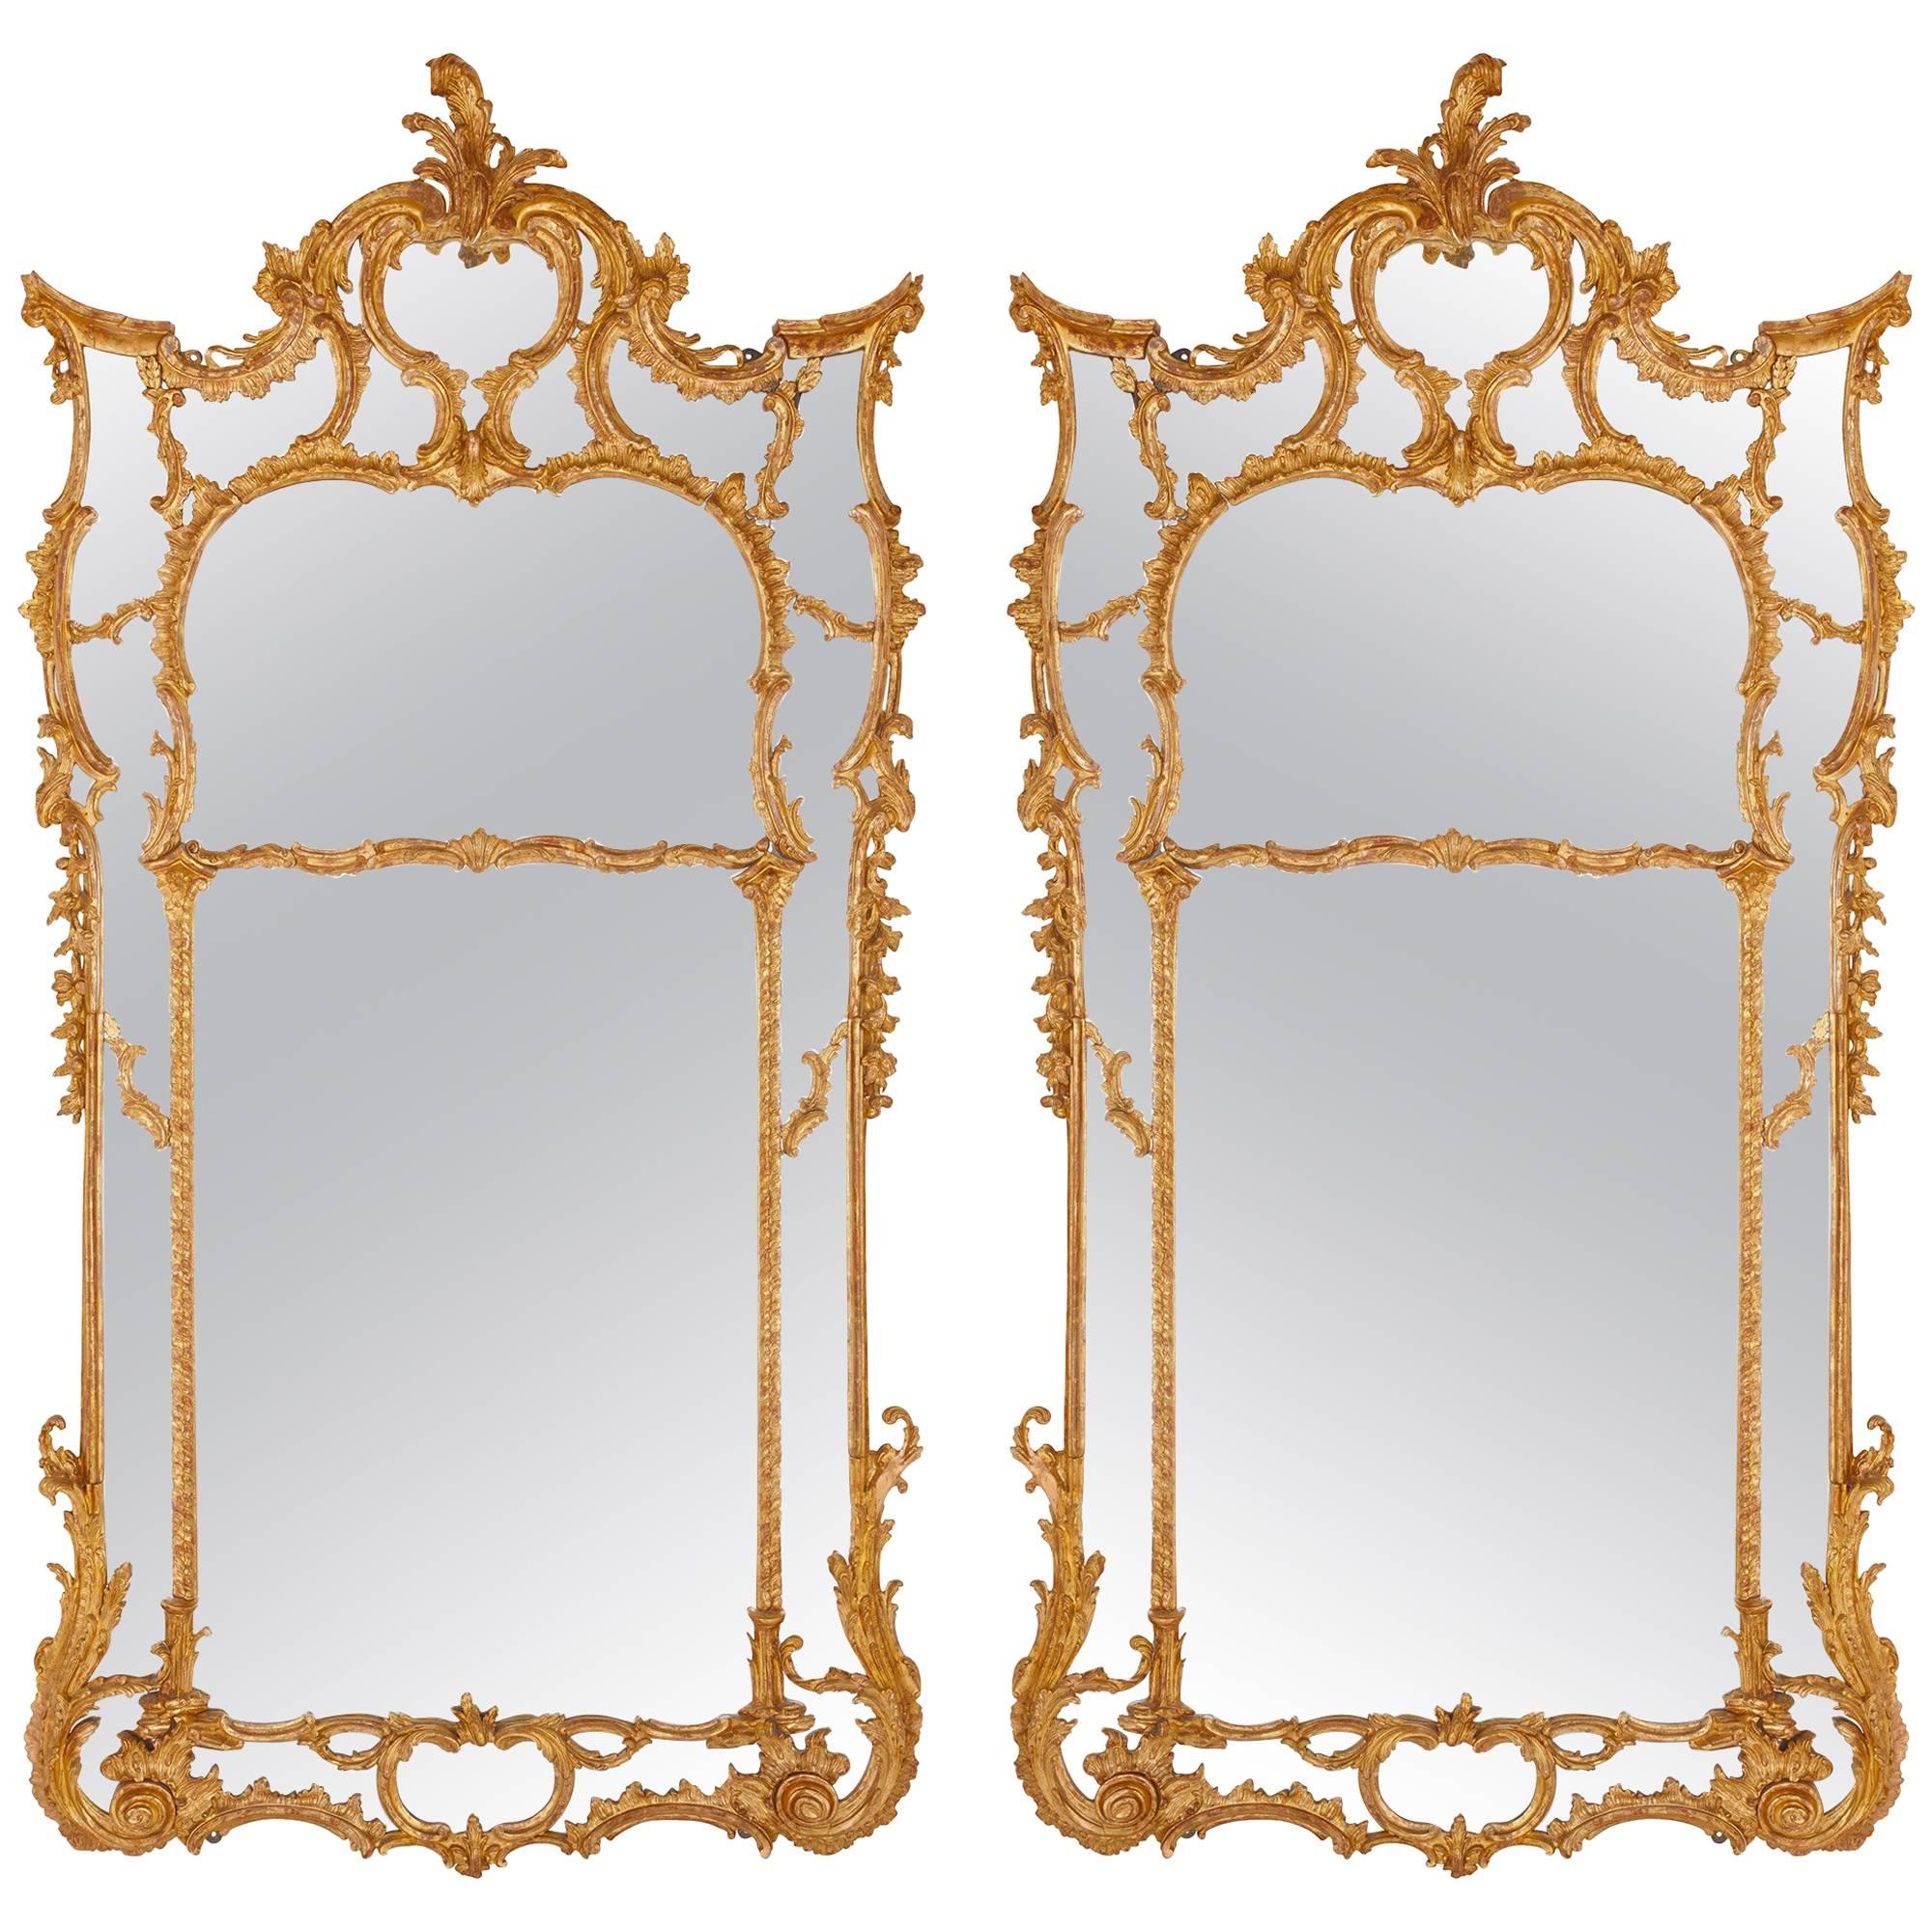 Pair of Large English Antique Giltwood Wall Mirrors in the Rococo Style